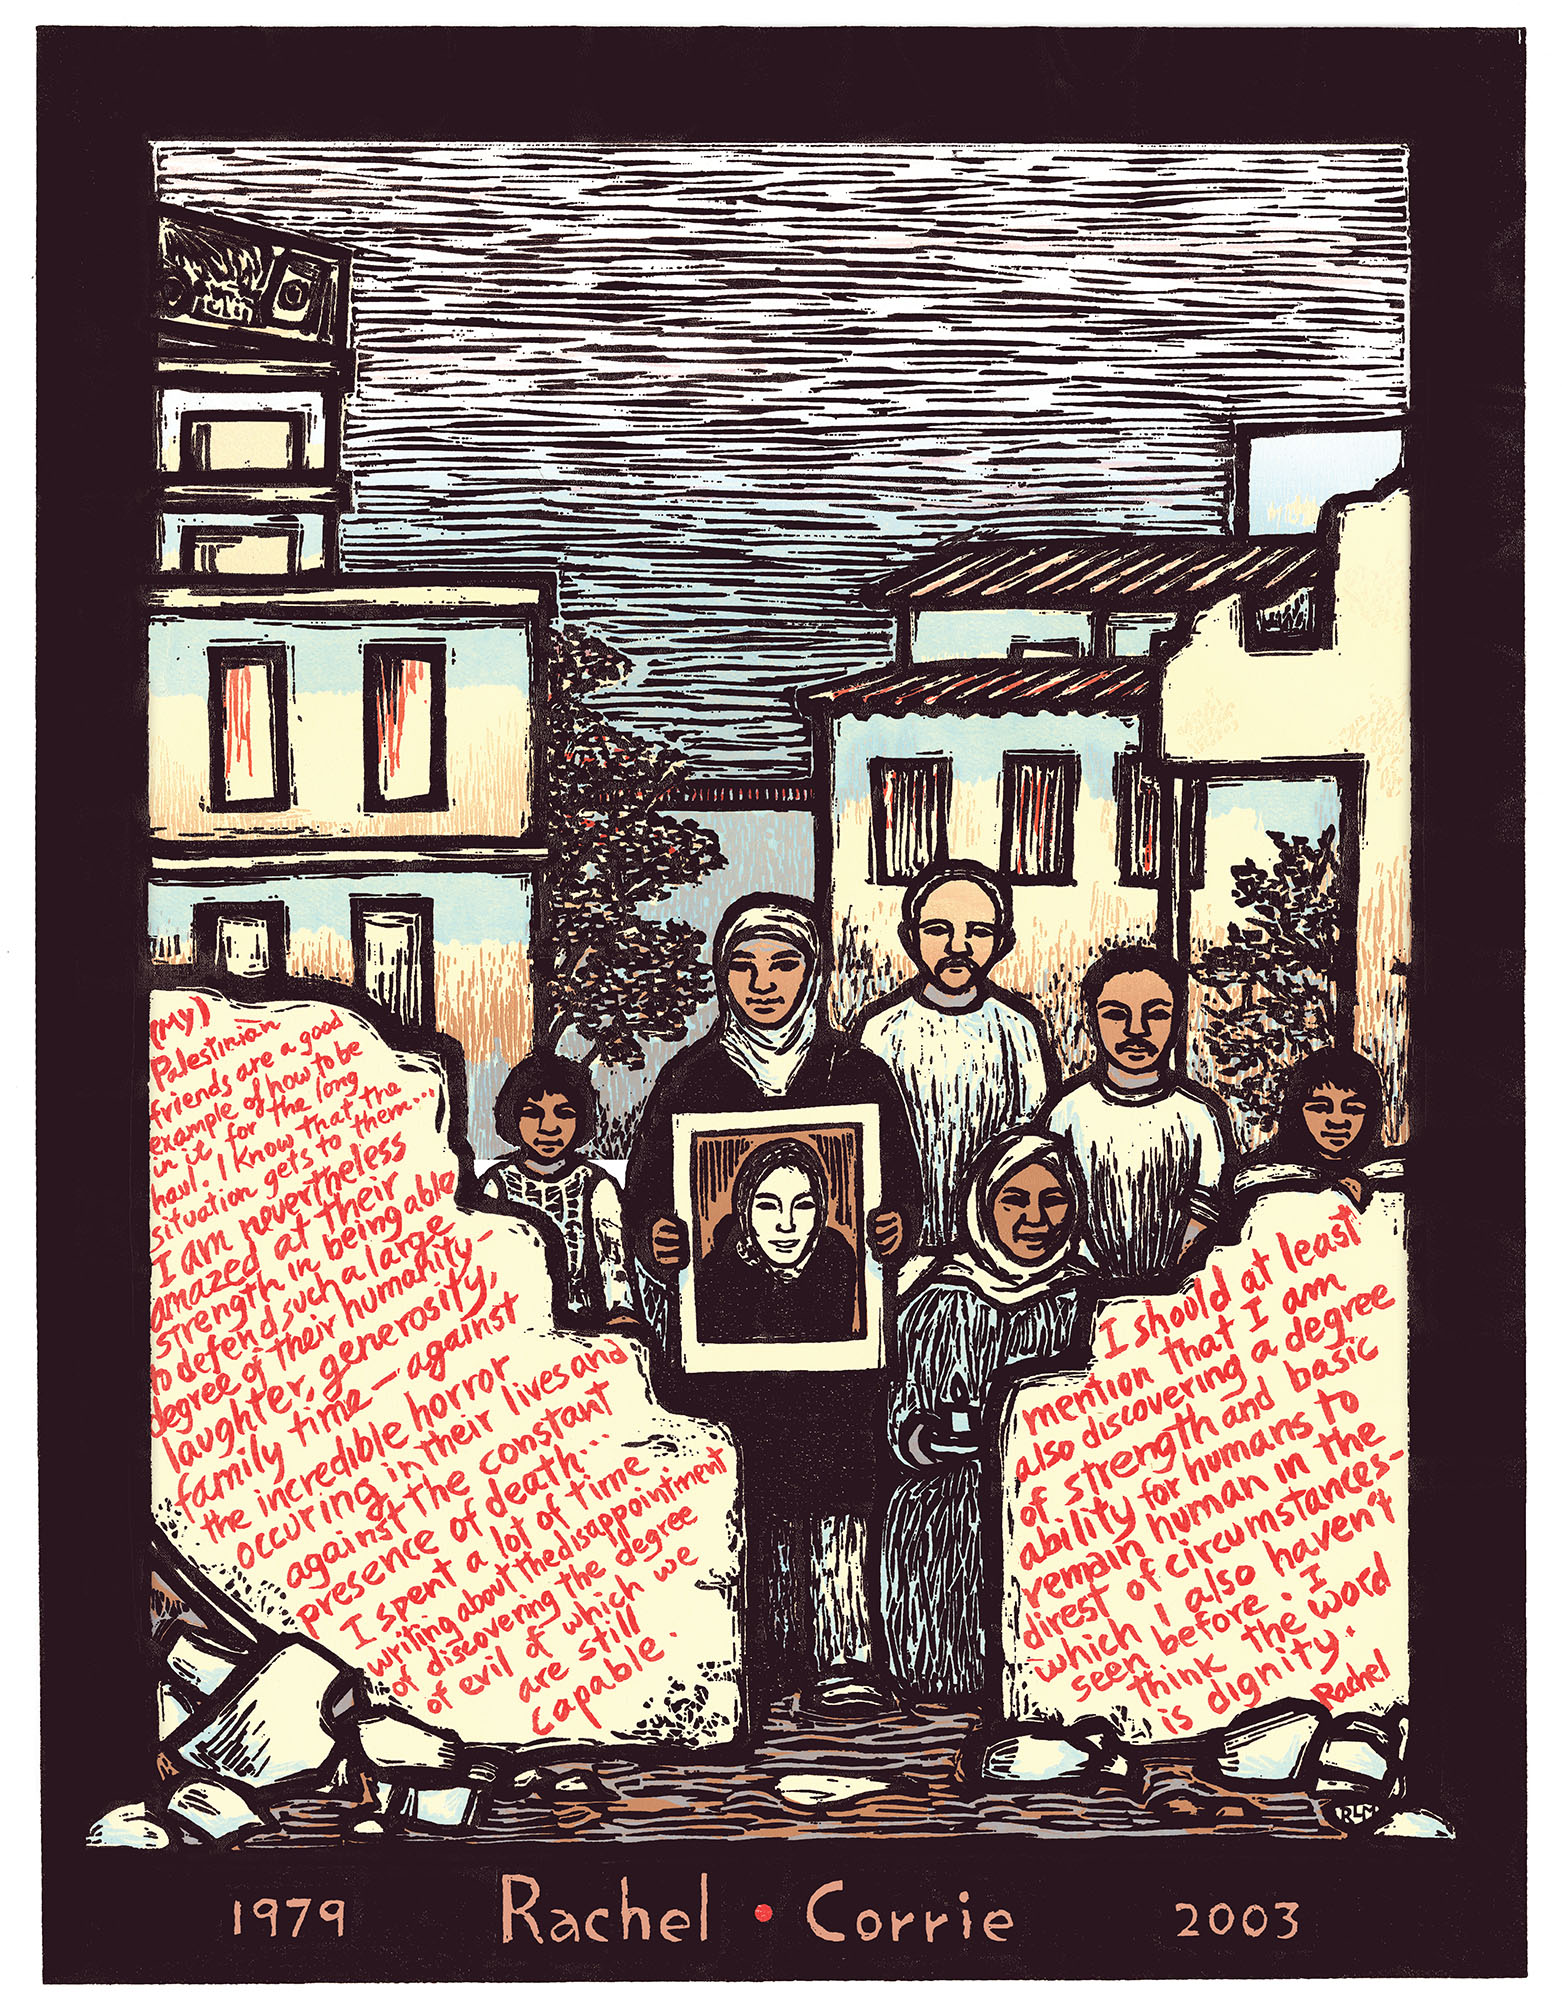 Rachel Corrie - Palestinian Human Rights Remembrance Poster by Ricardo Levins Morales